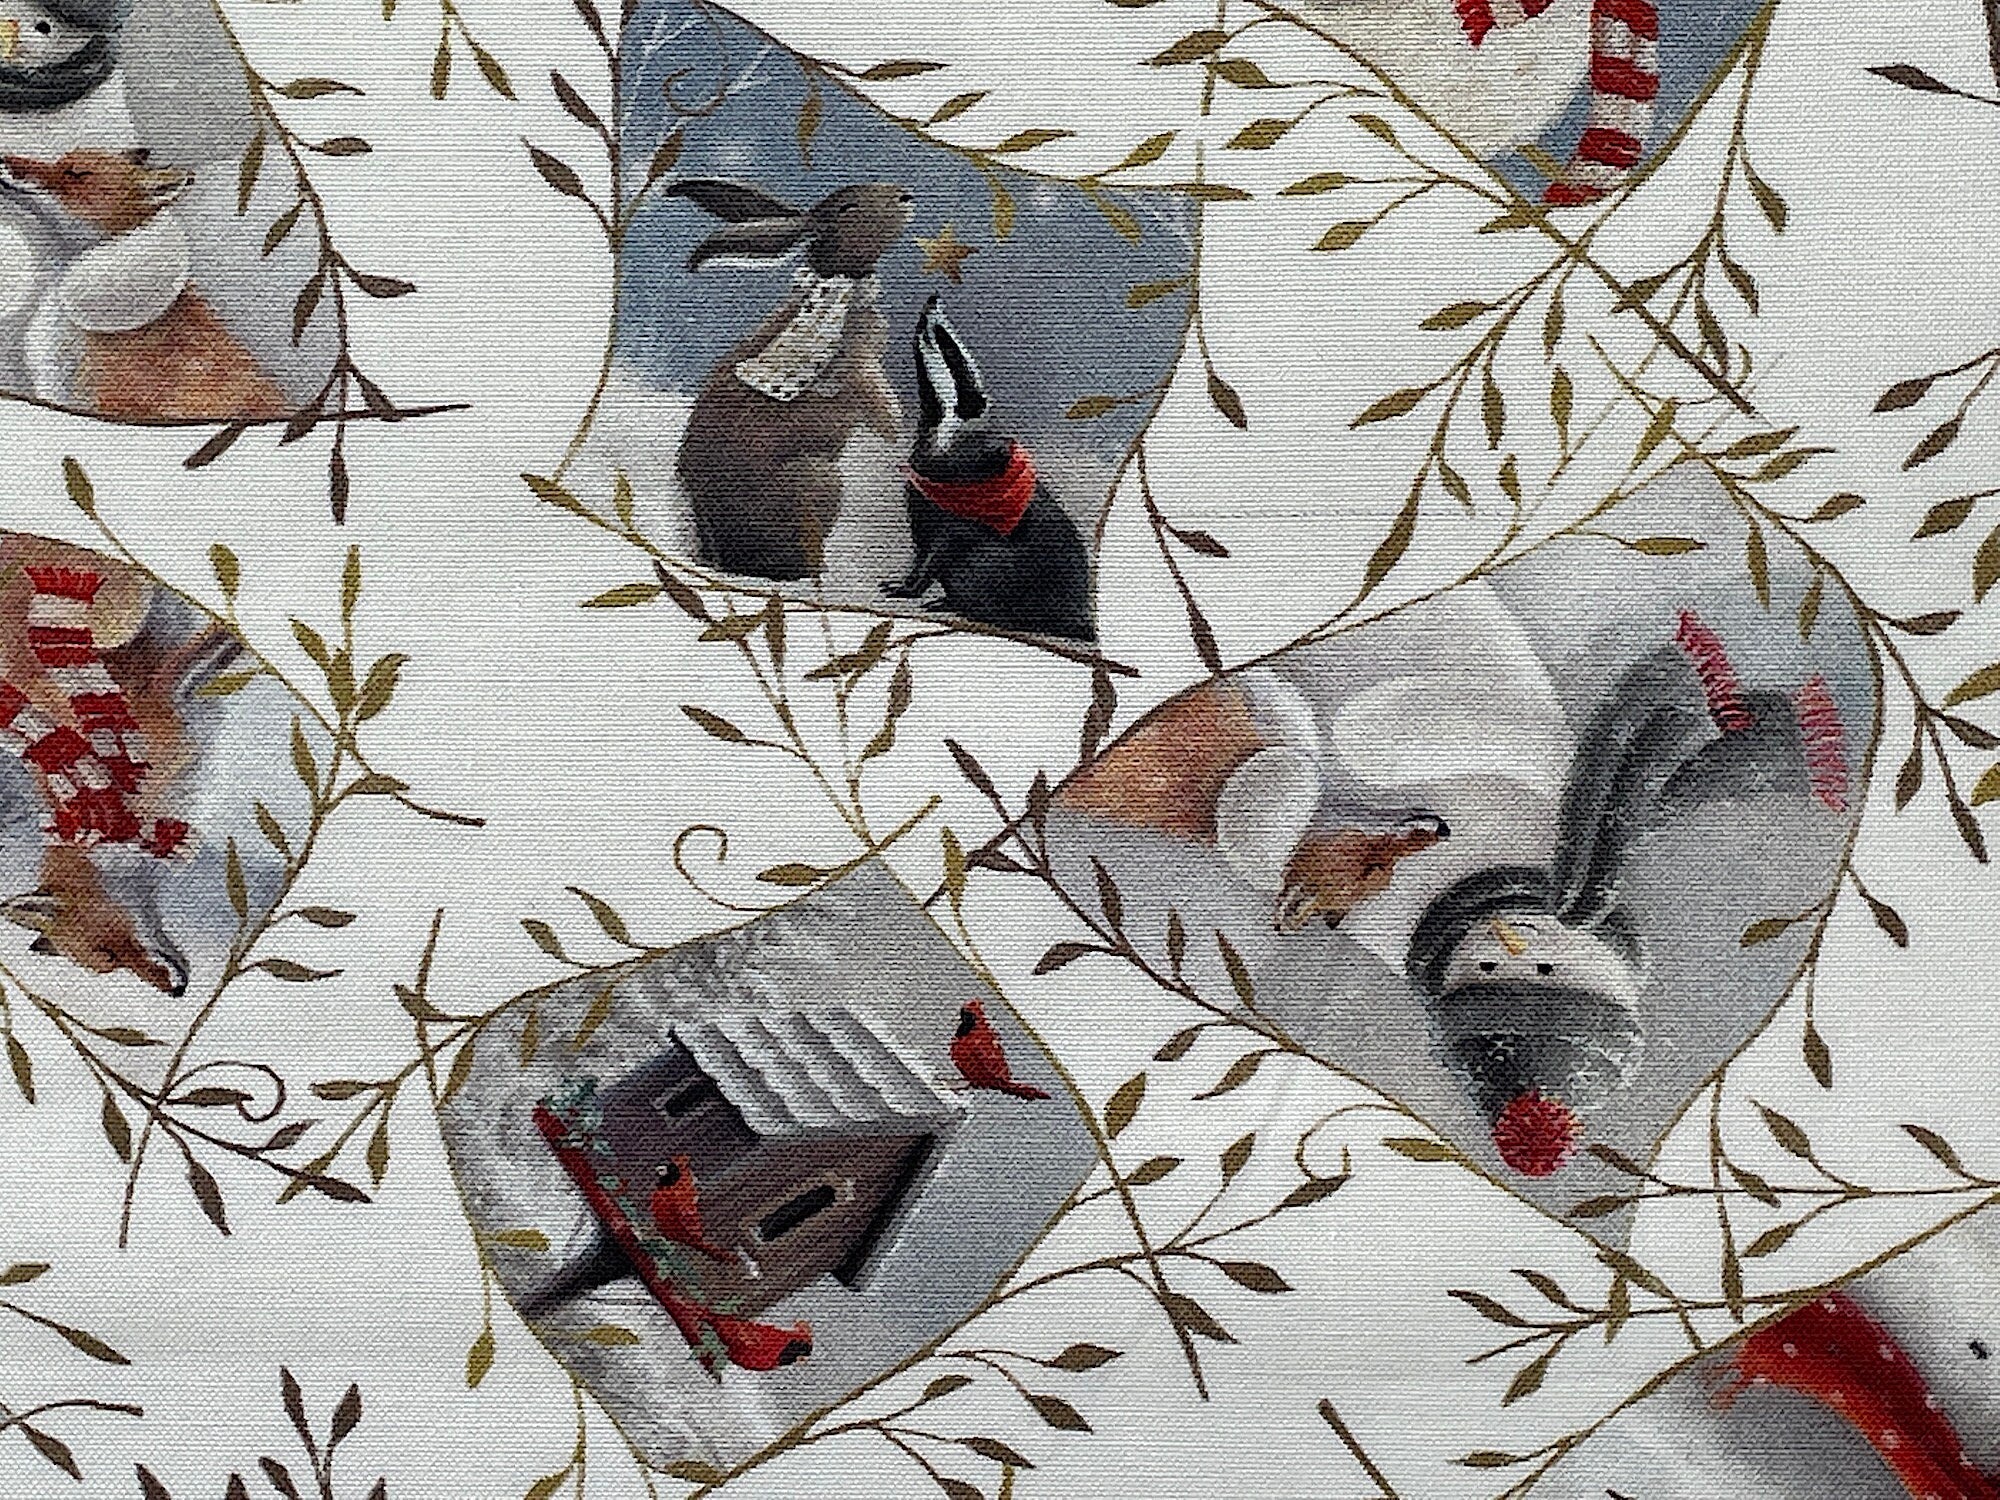 This white fabric is covered with snowmen, bird houses, birds and other wildlife such as bears, bunnies and fox.